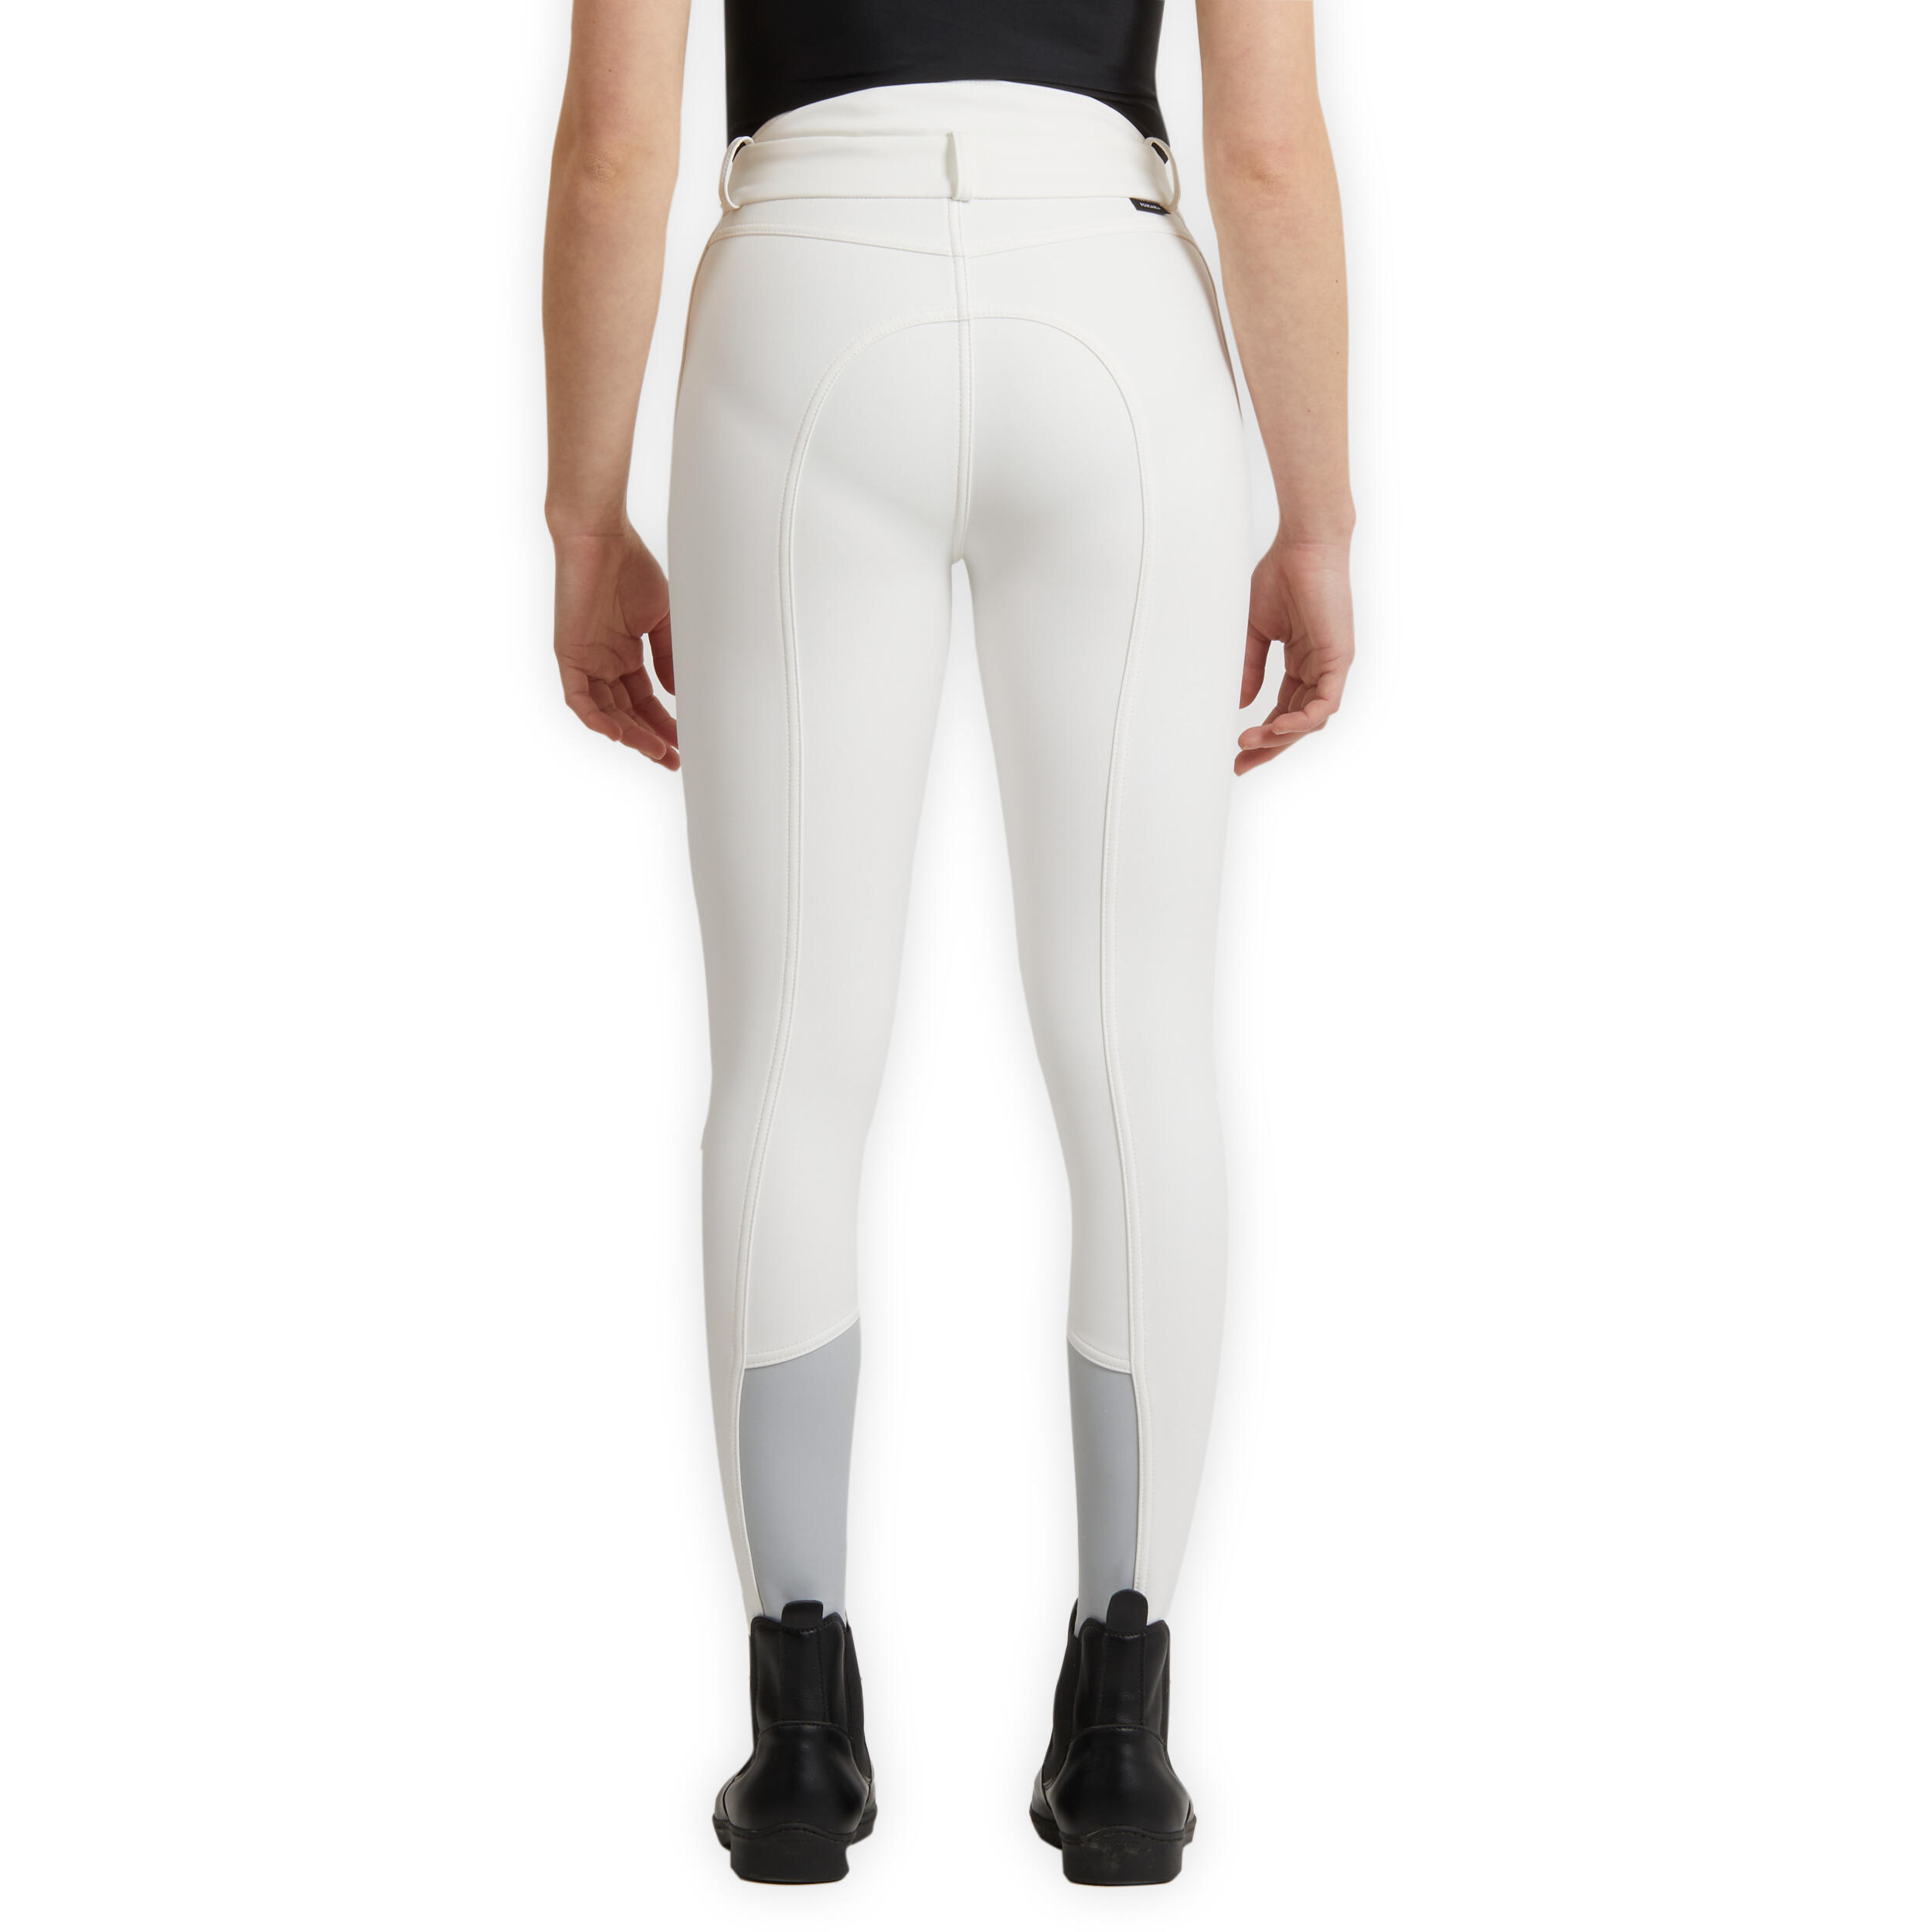 Kids' Horse Riding Warm and Water Repellent Competition Jodhpurs 500 Kipwarm - White 6/9